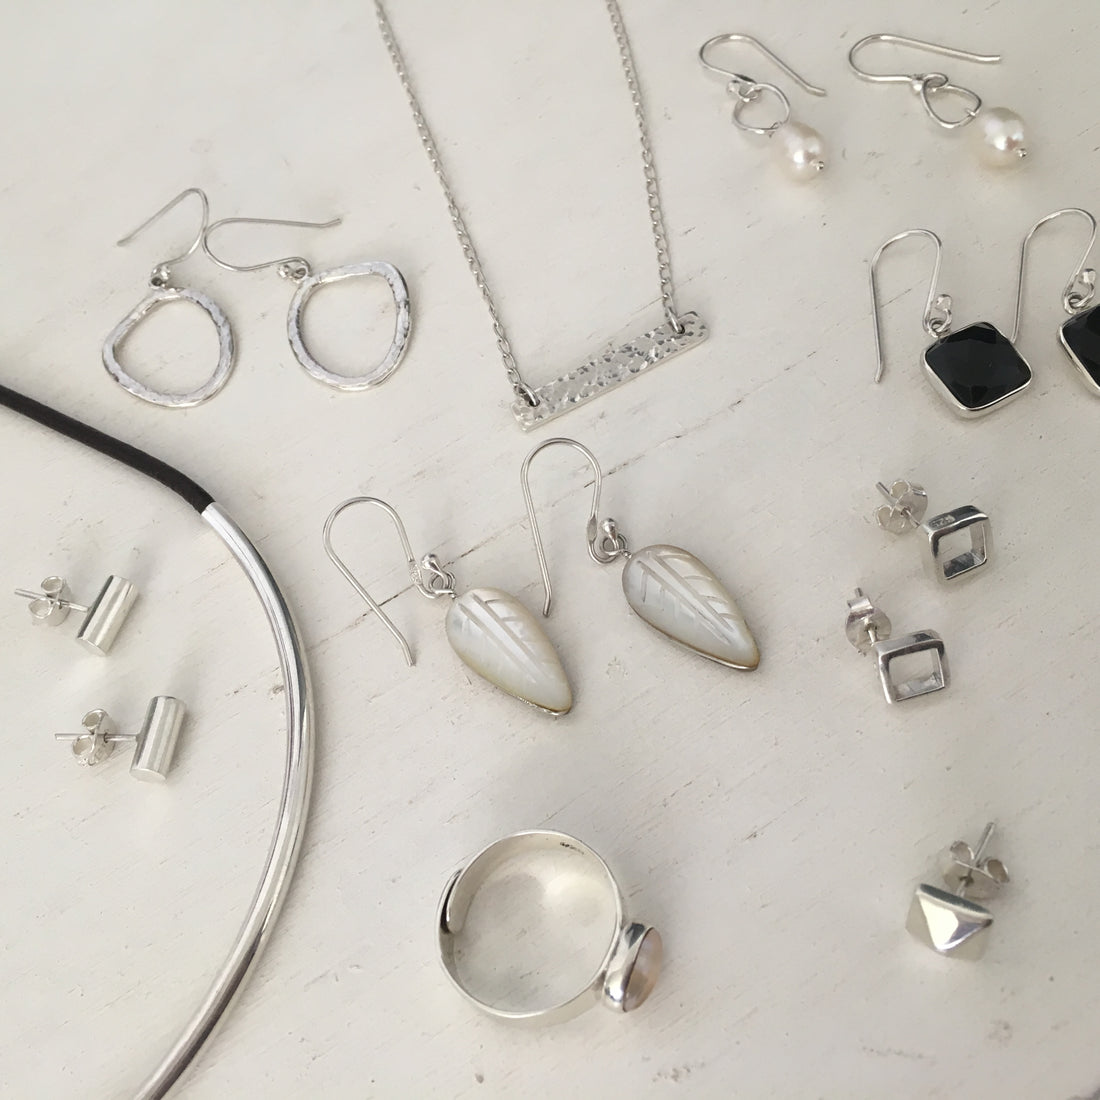 How to take care of your jewelry: make it last, make it sustainable